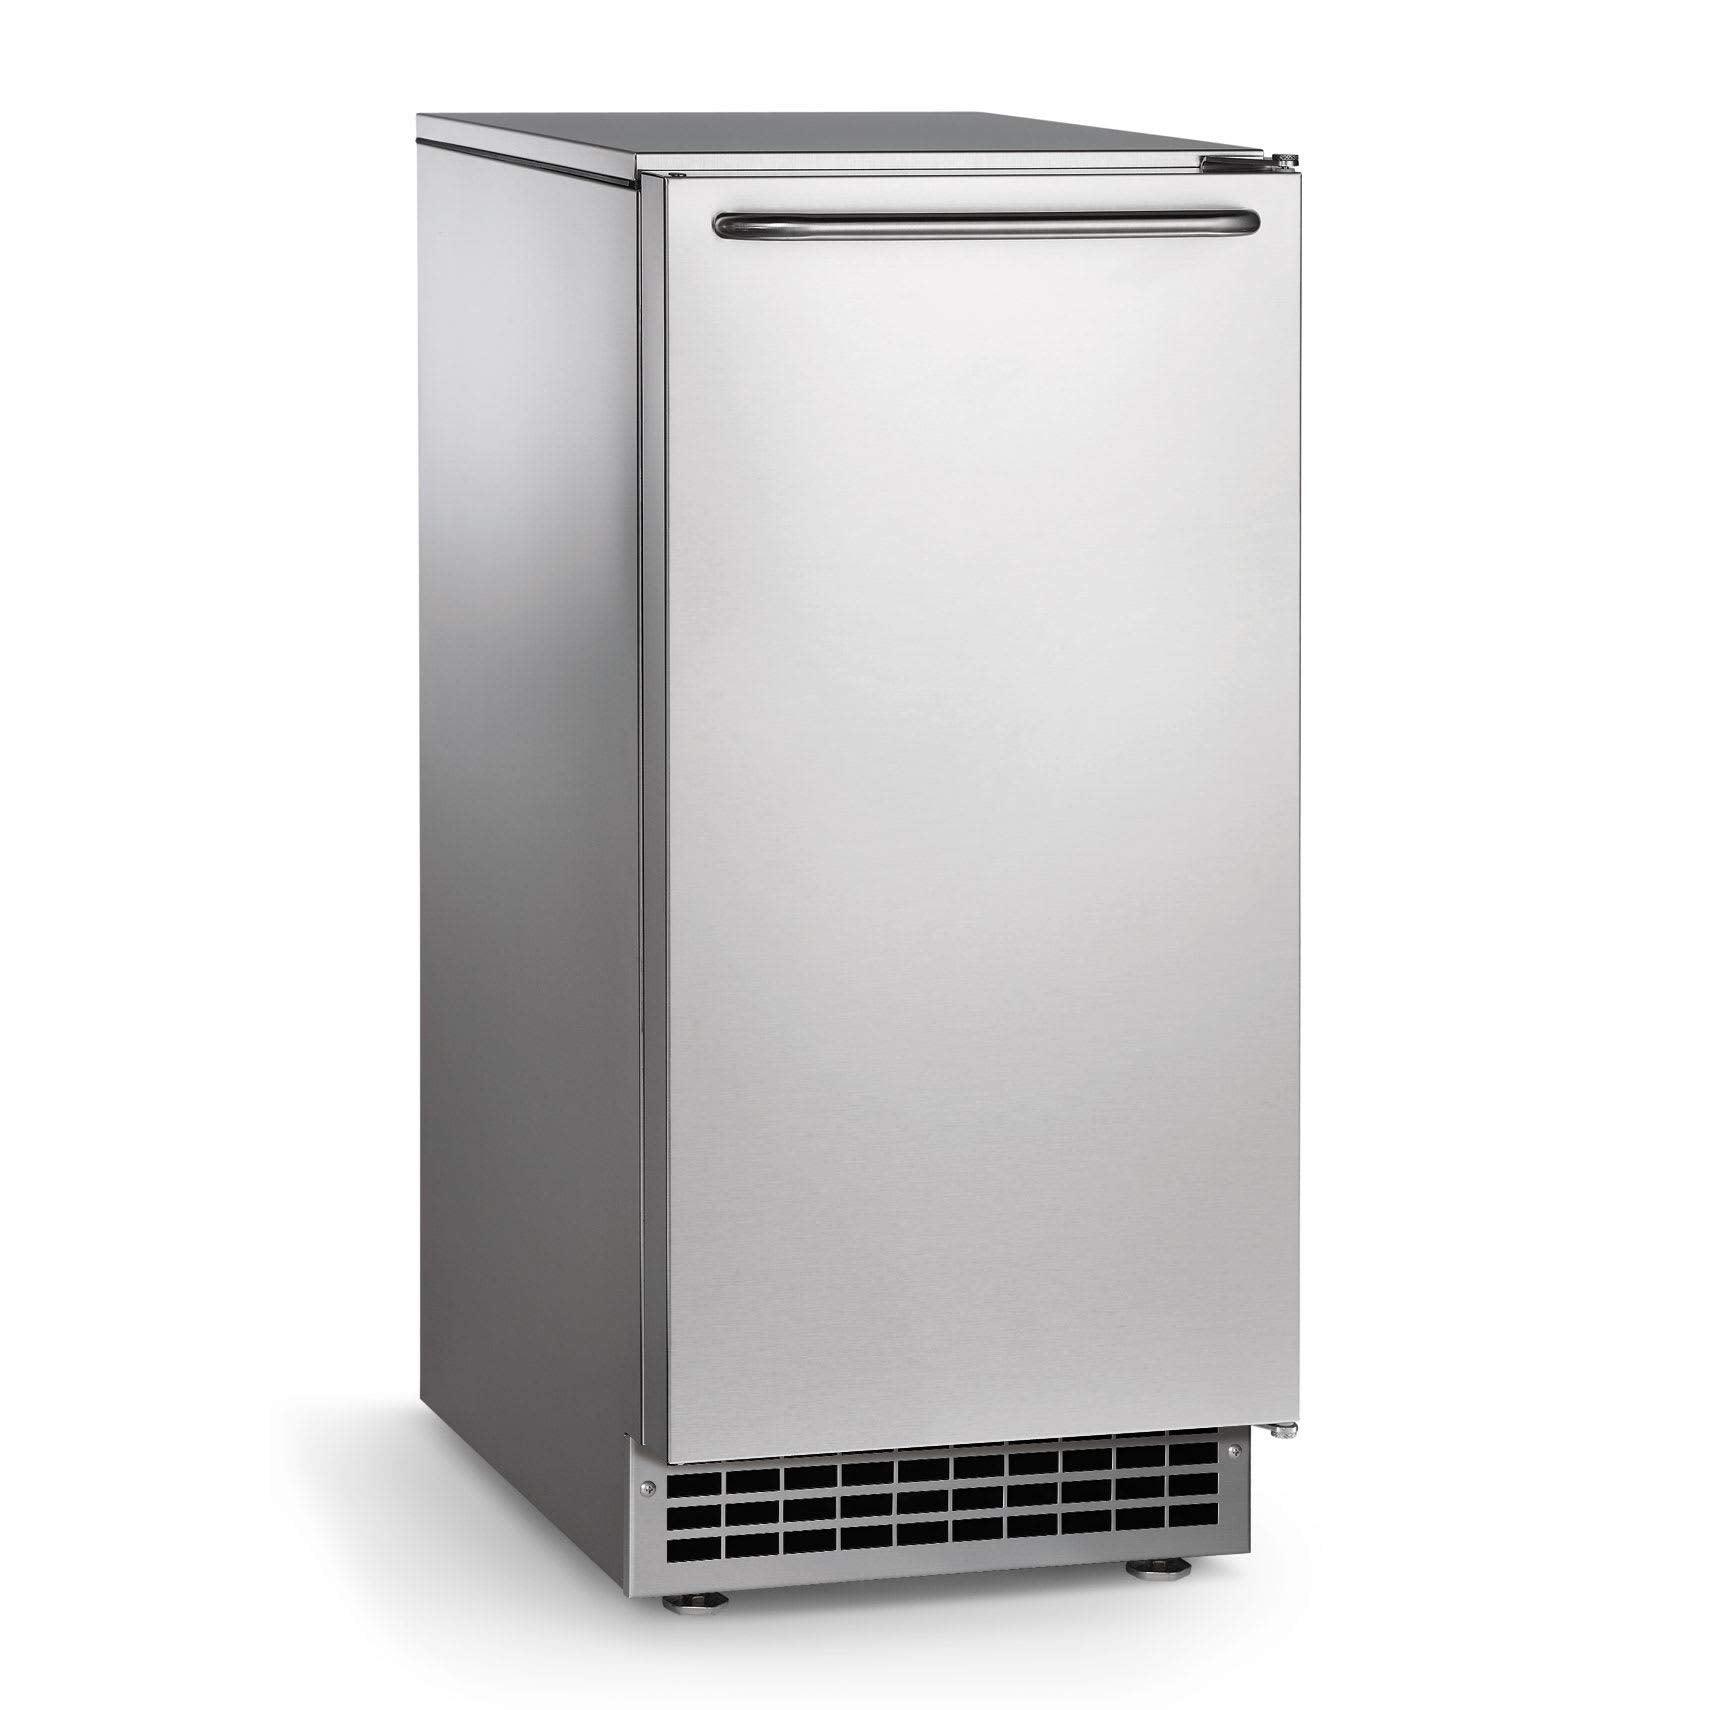 Scotsman CU50PA-1 Undercounter Top Hat Ice Maker - 65 lbs/day, Pump Drain, Outdoor Rated, 115v (Renewed) - CookCave